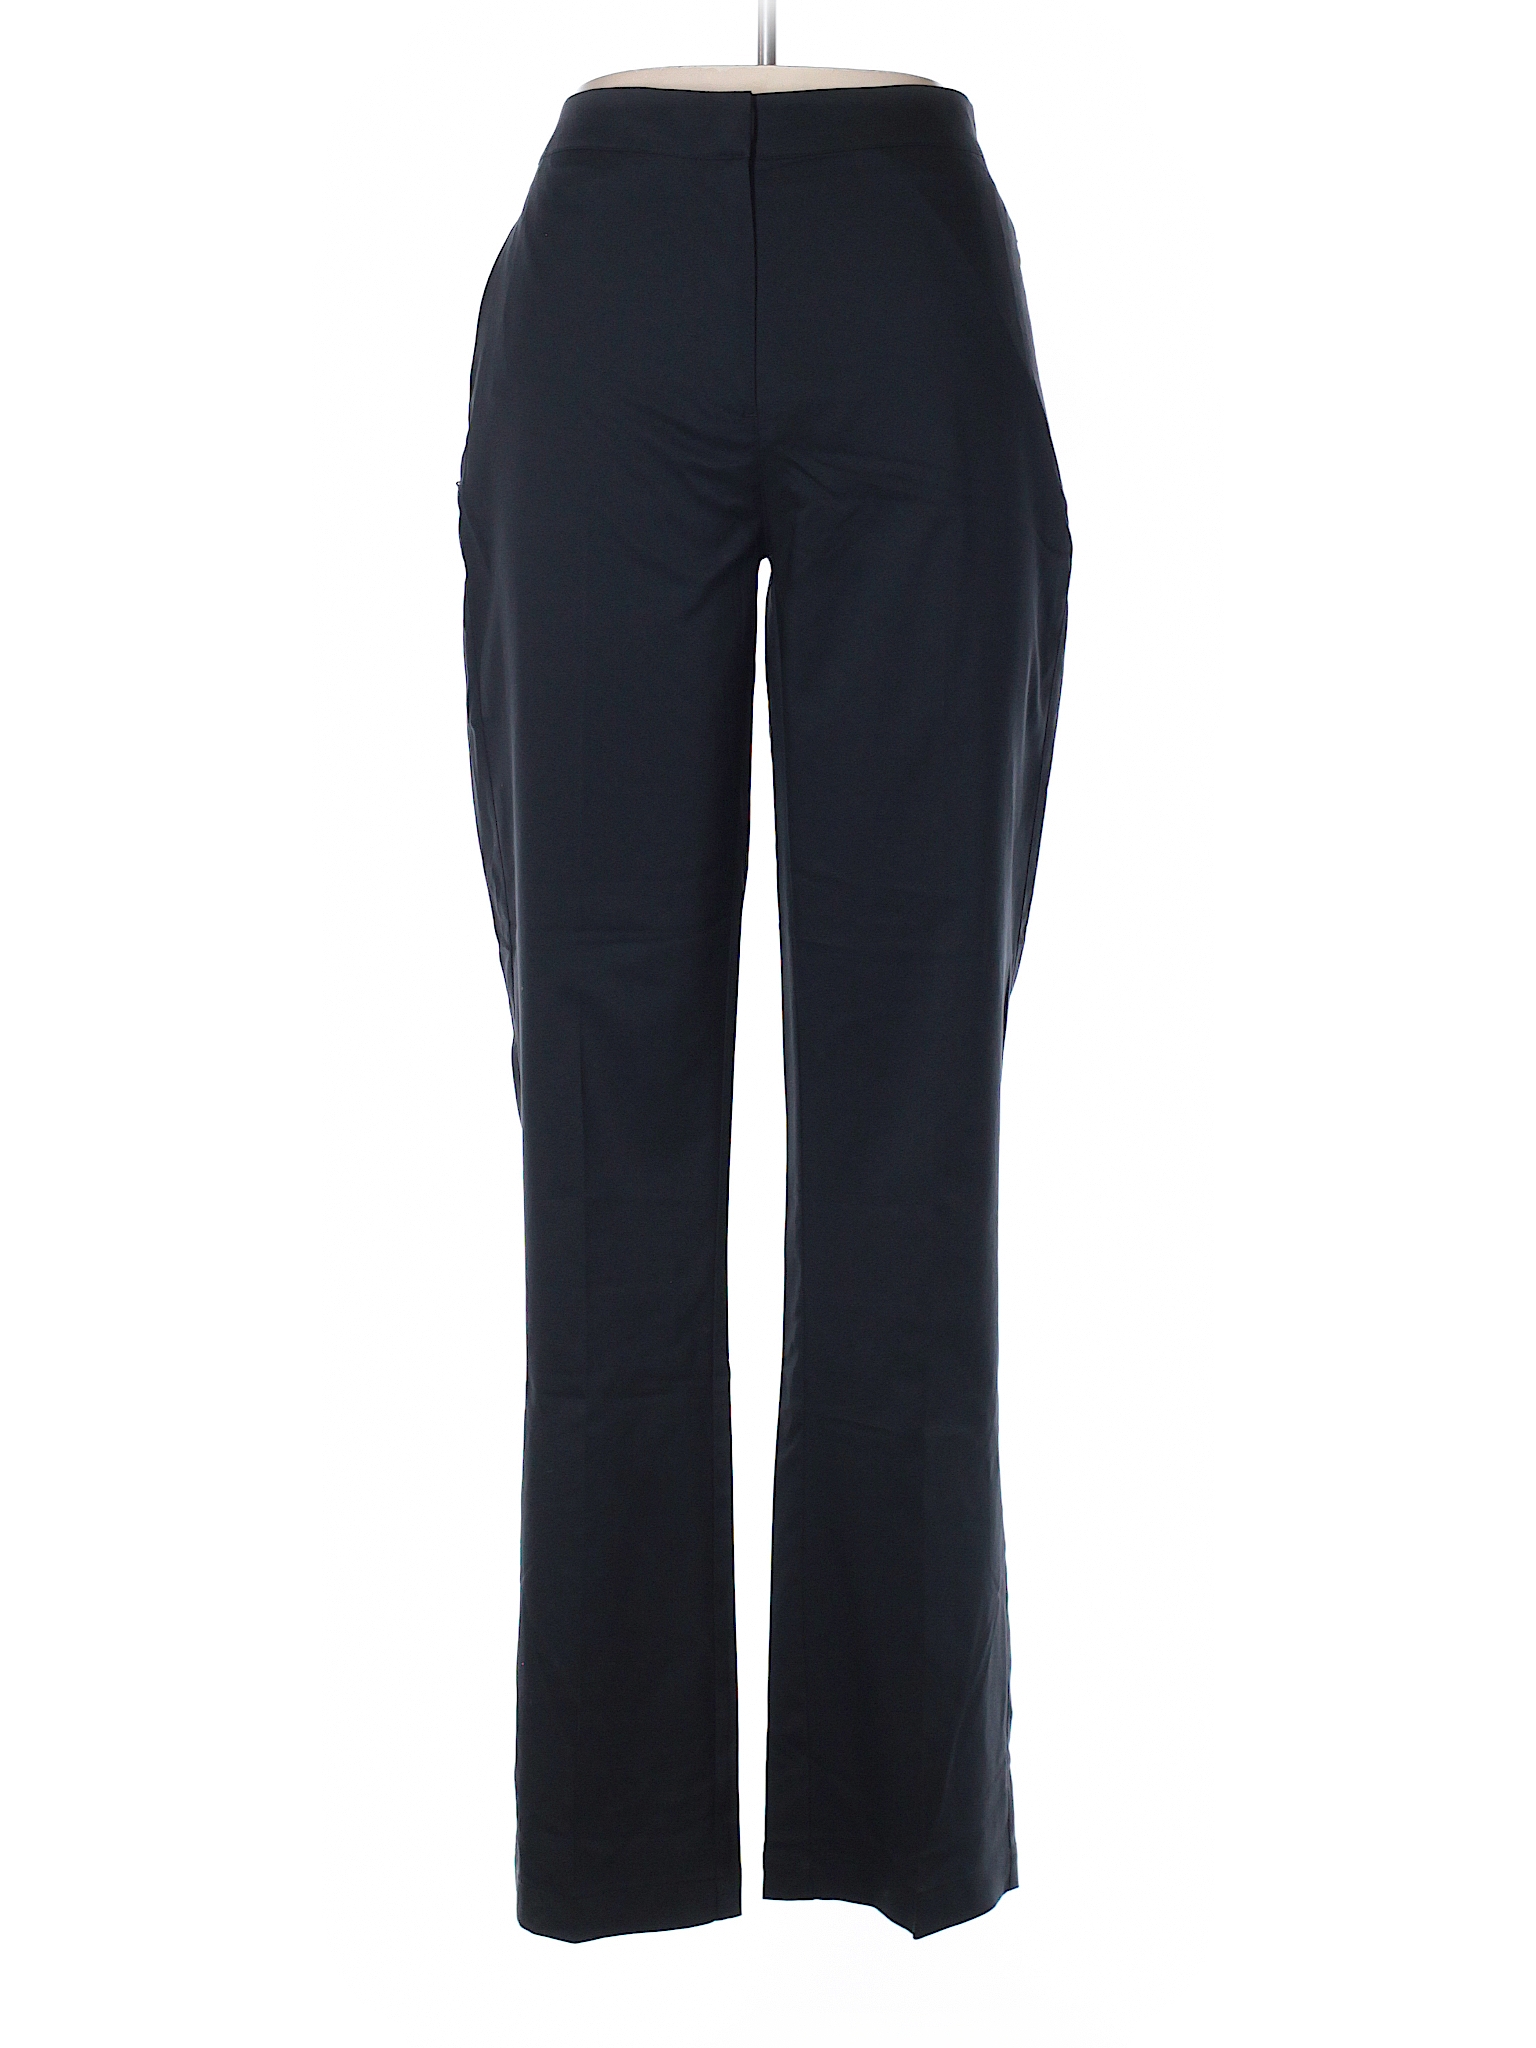 Maggie Lane 100% Polyester Solid Black Dress Pants Size 10 - 93% off ...